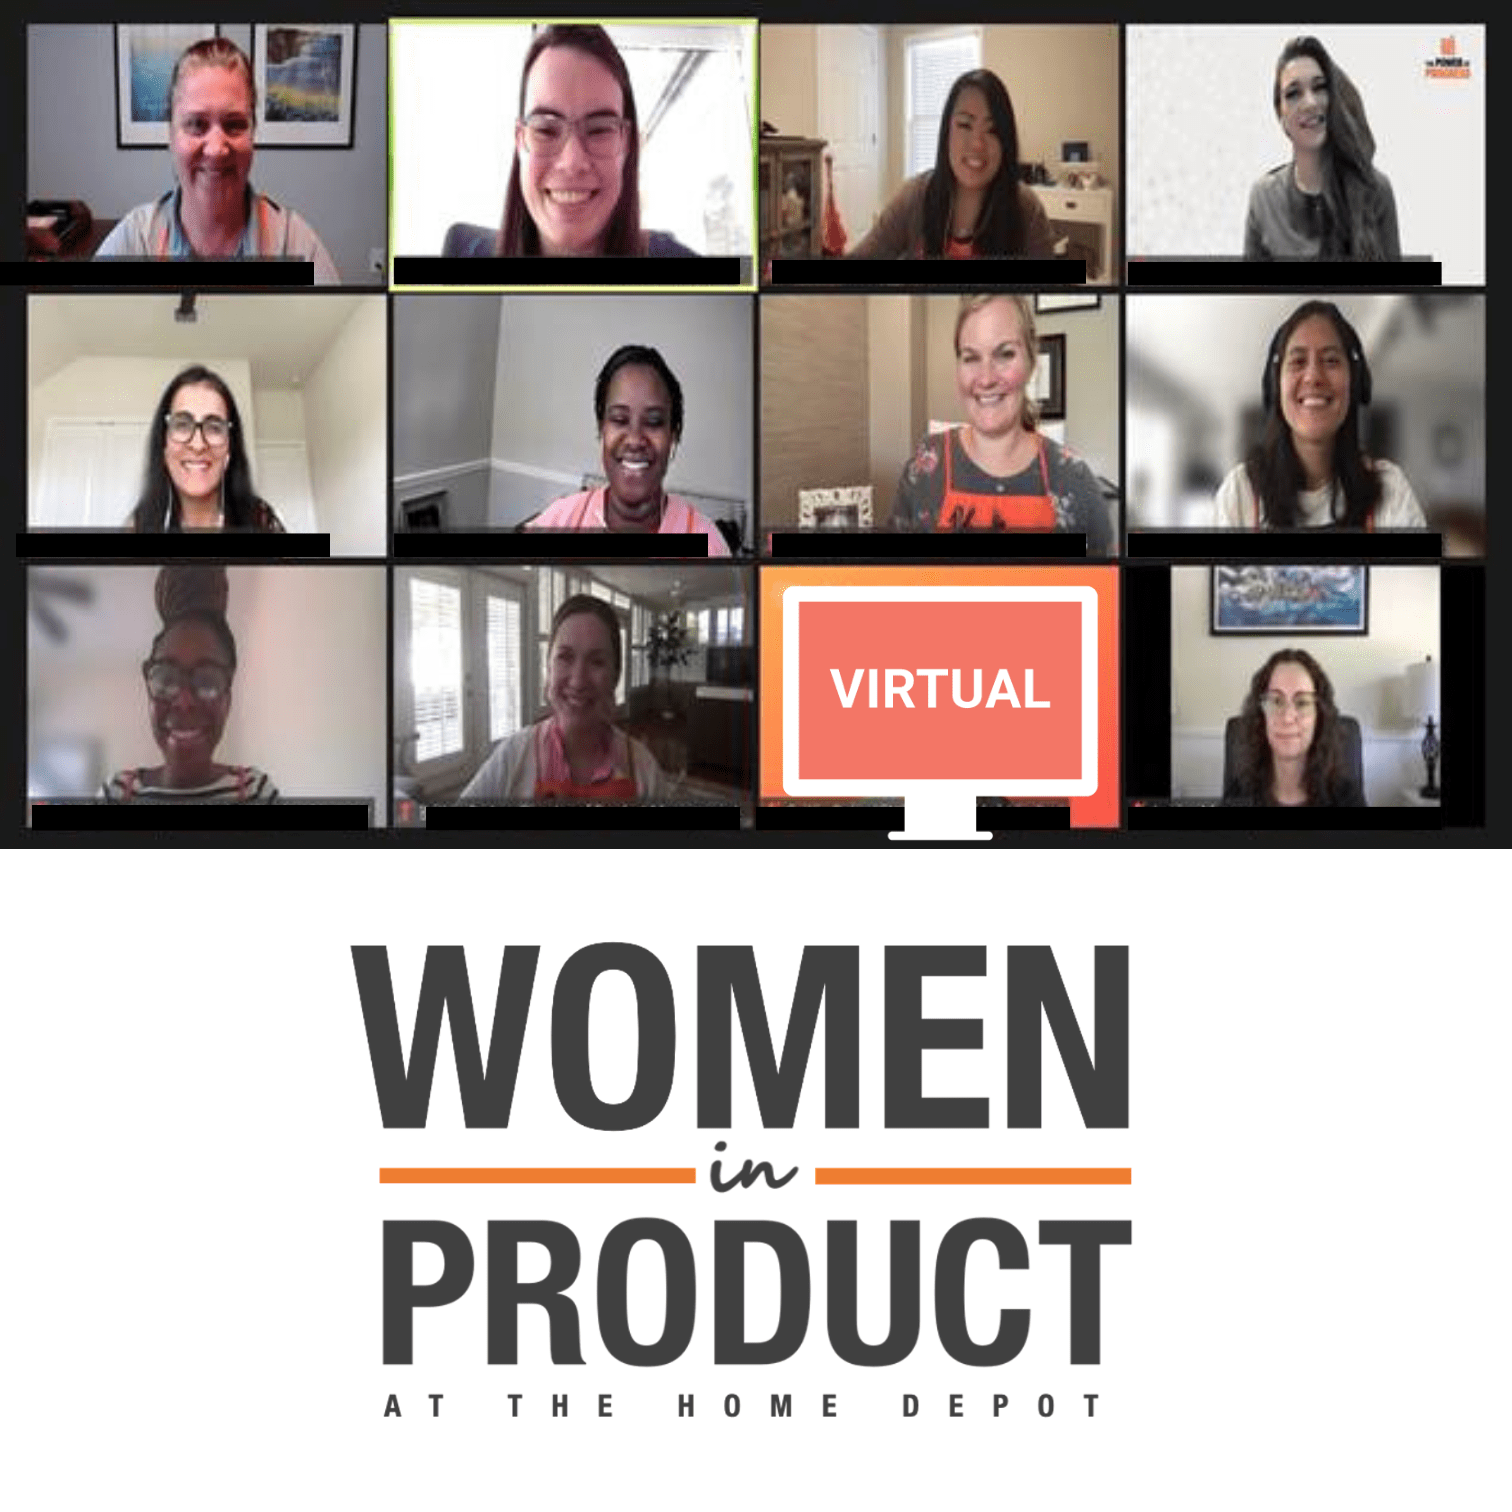 Women in Product at the Home Depot